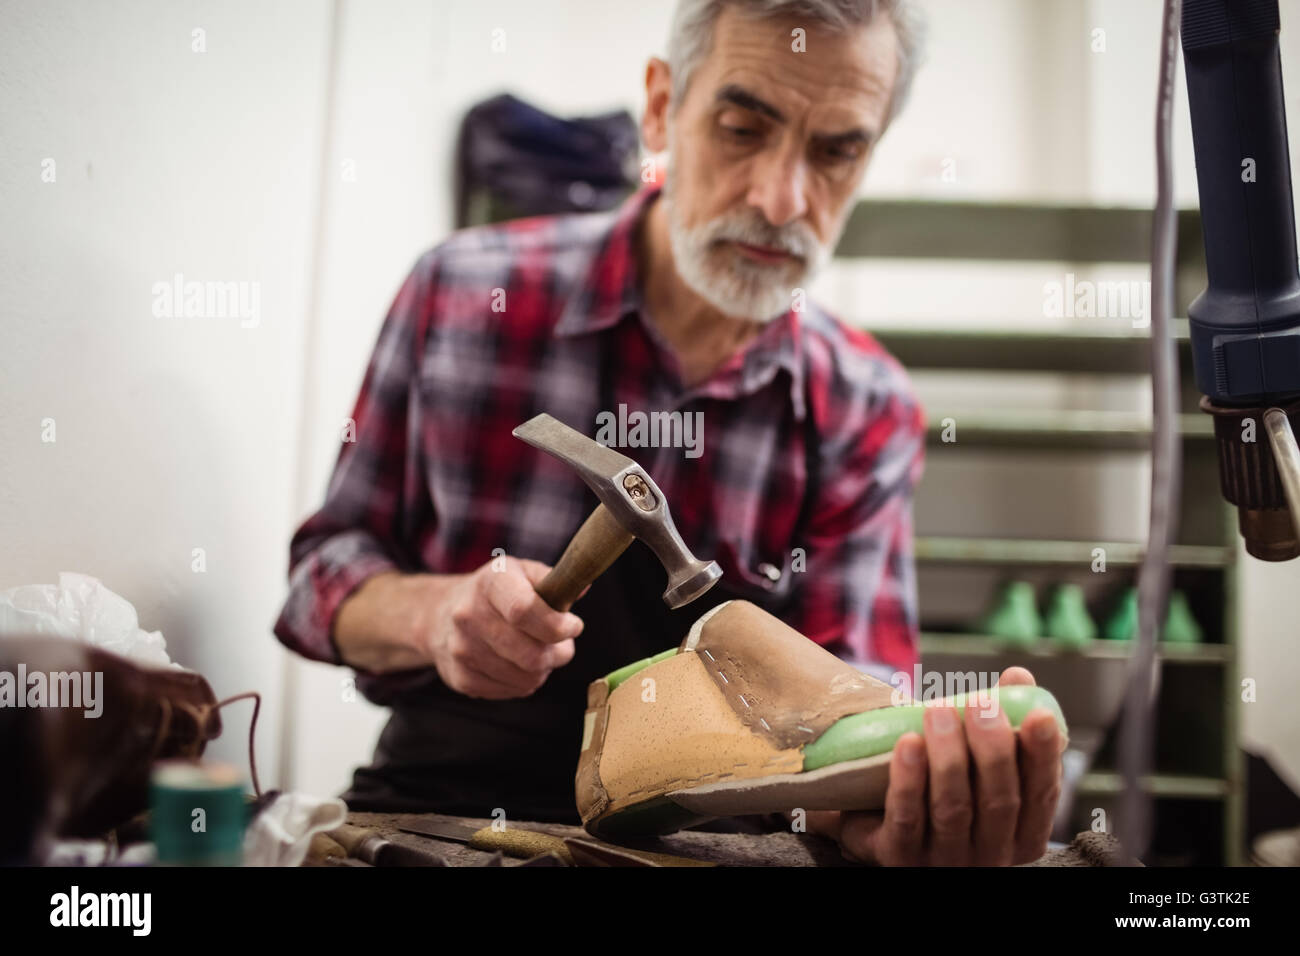 Low angle view of cobbler hammering on a shoe Stock Photo